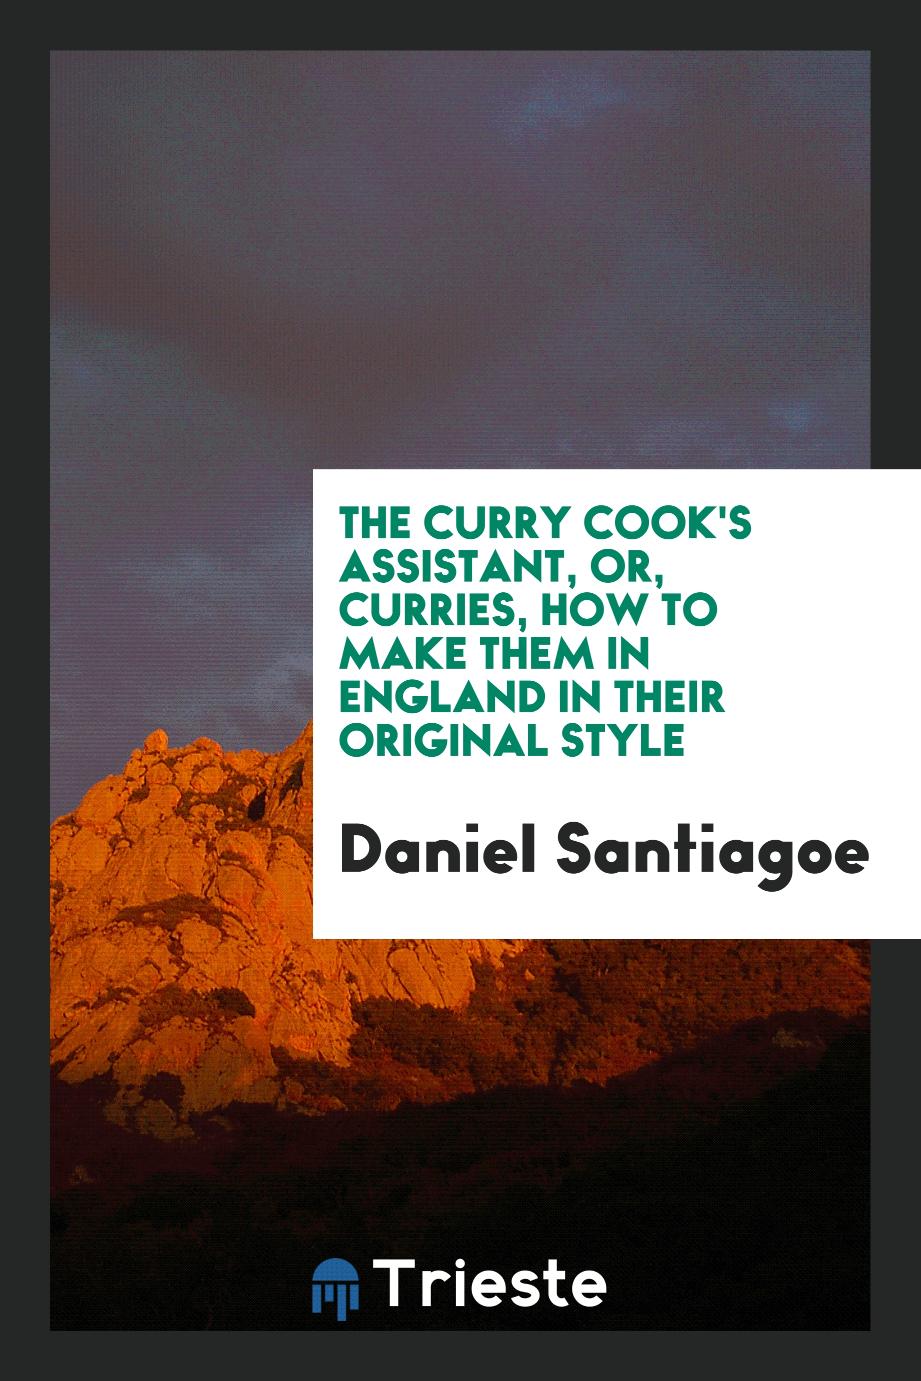 The Curry Cook's Assistant, or, Curries, How to Make Them in England in Their Original Style